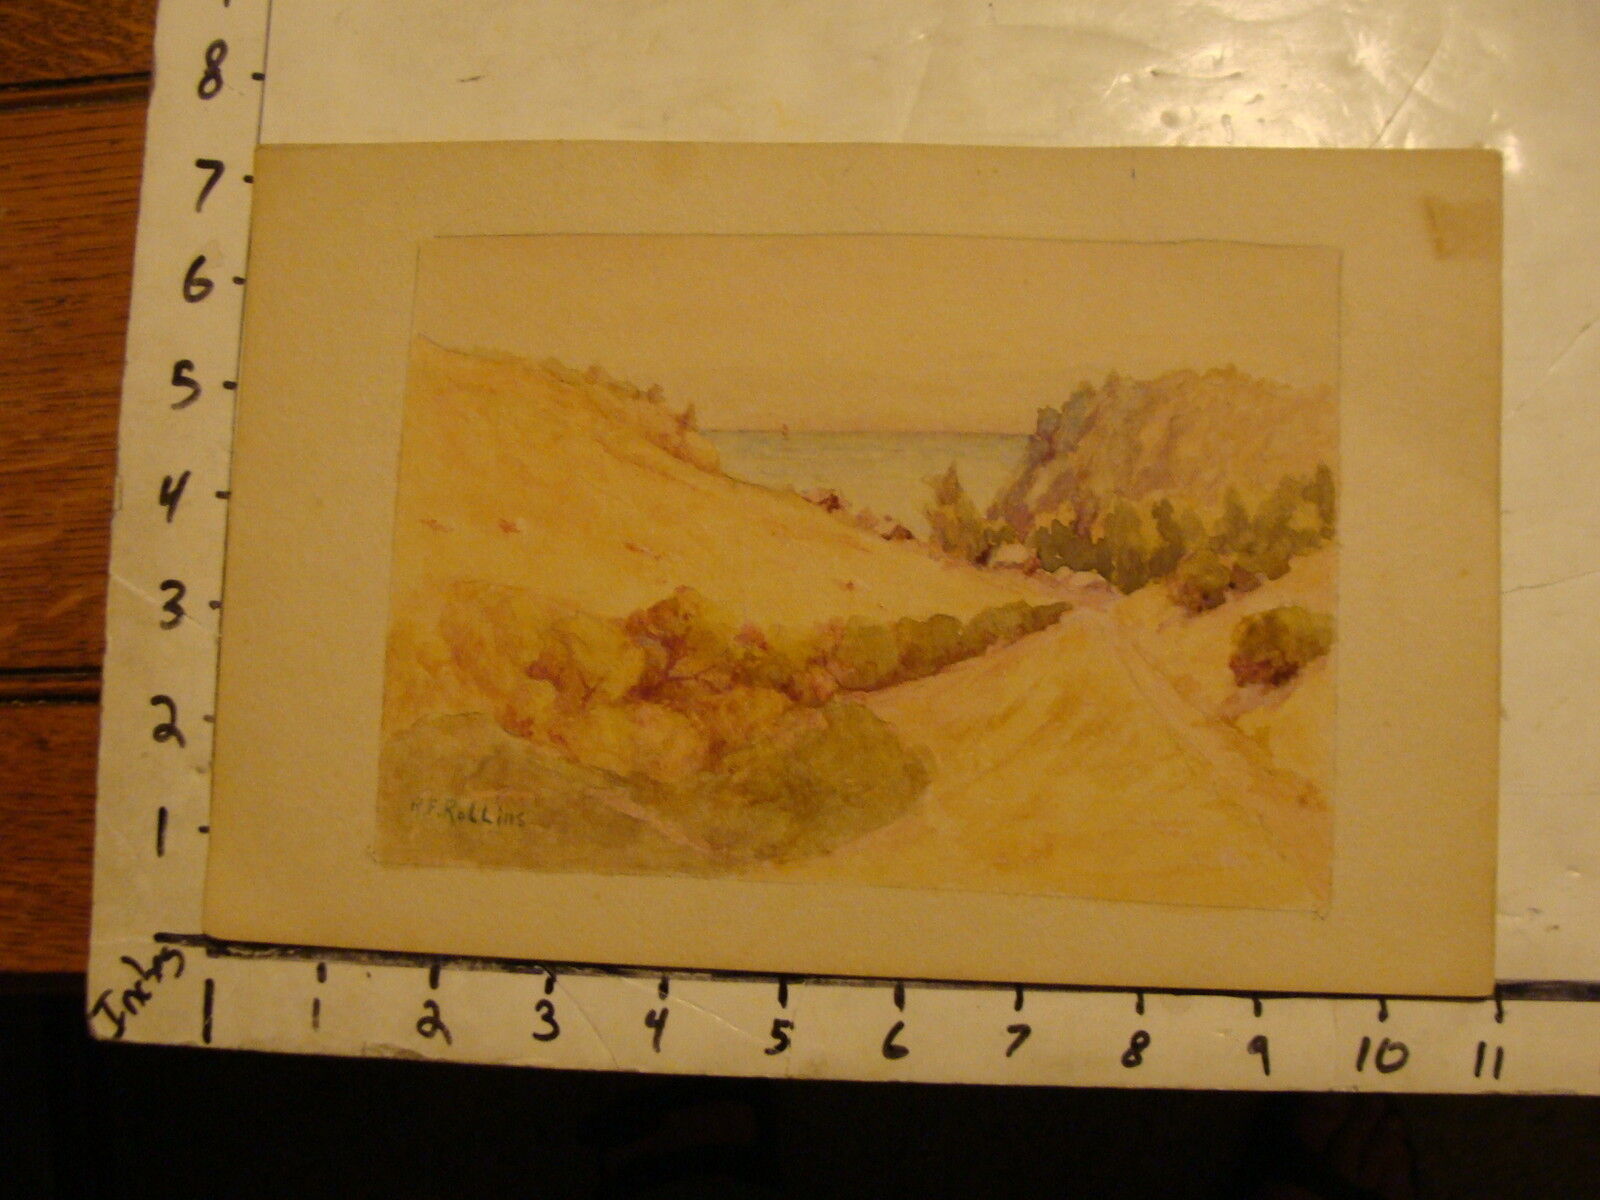 R. F. ROLLINS CALIFORNIA WATERCOLOR: CATALINA ISLAND - VIEW FROM GOLF LINKS